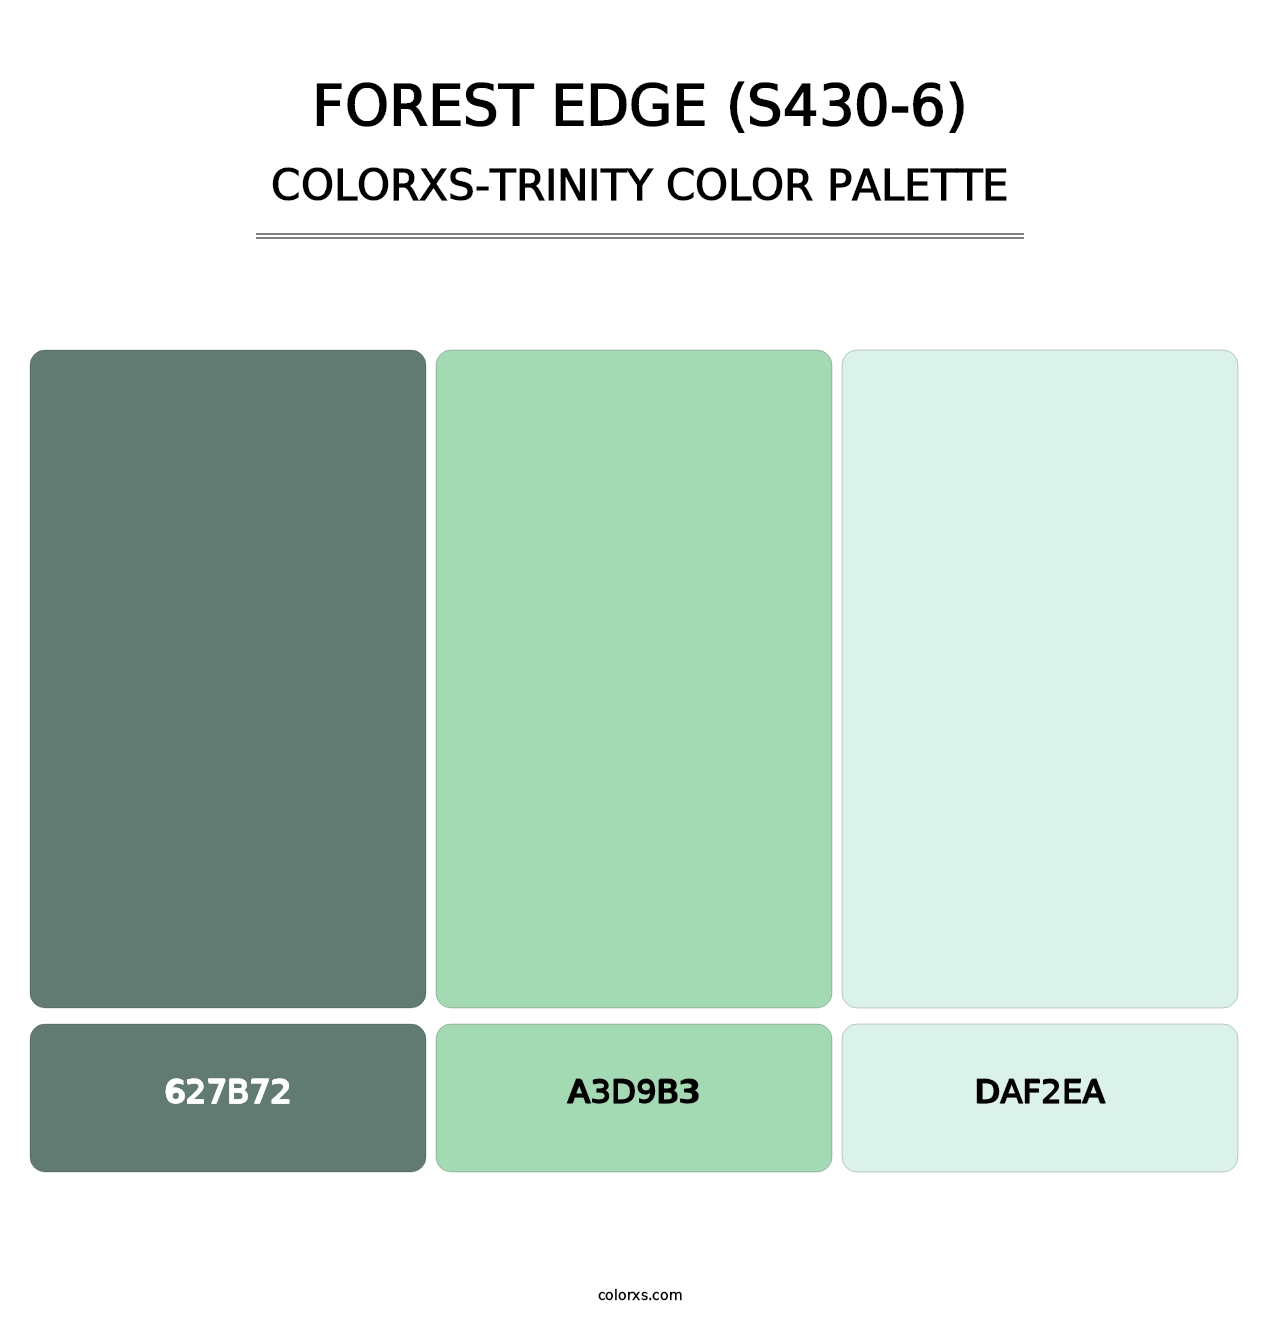 Forest Edge (S430-6) - Colorxs Trinity Palette